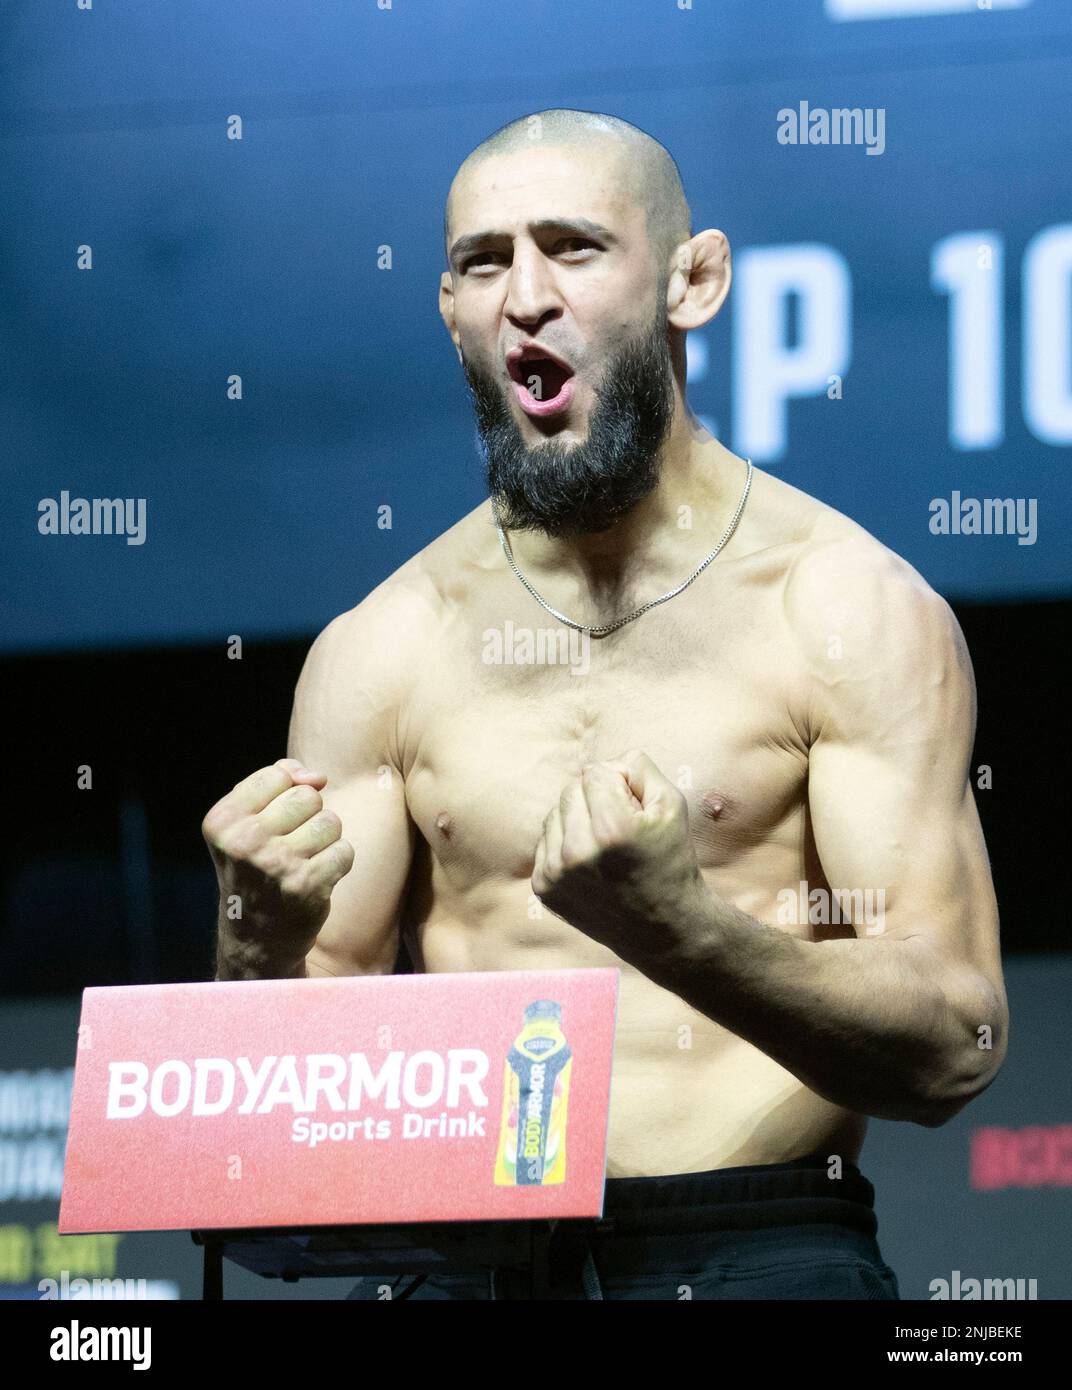 UFC fighter Khamzat Chimaev poses on the scale during a ceremonial weigh-in for the UFC 279 mixed martial arts event Friday, Sept